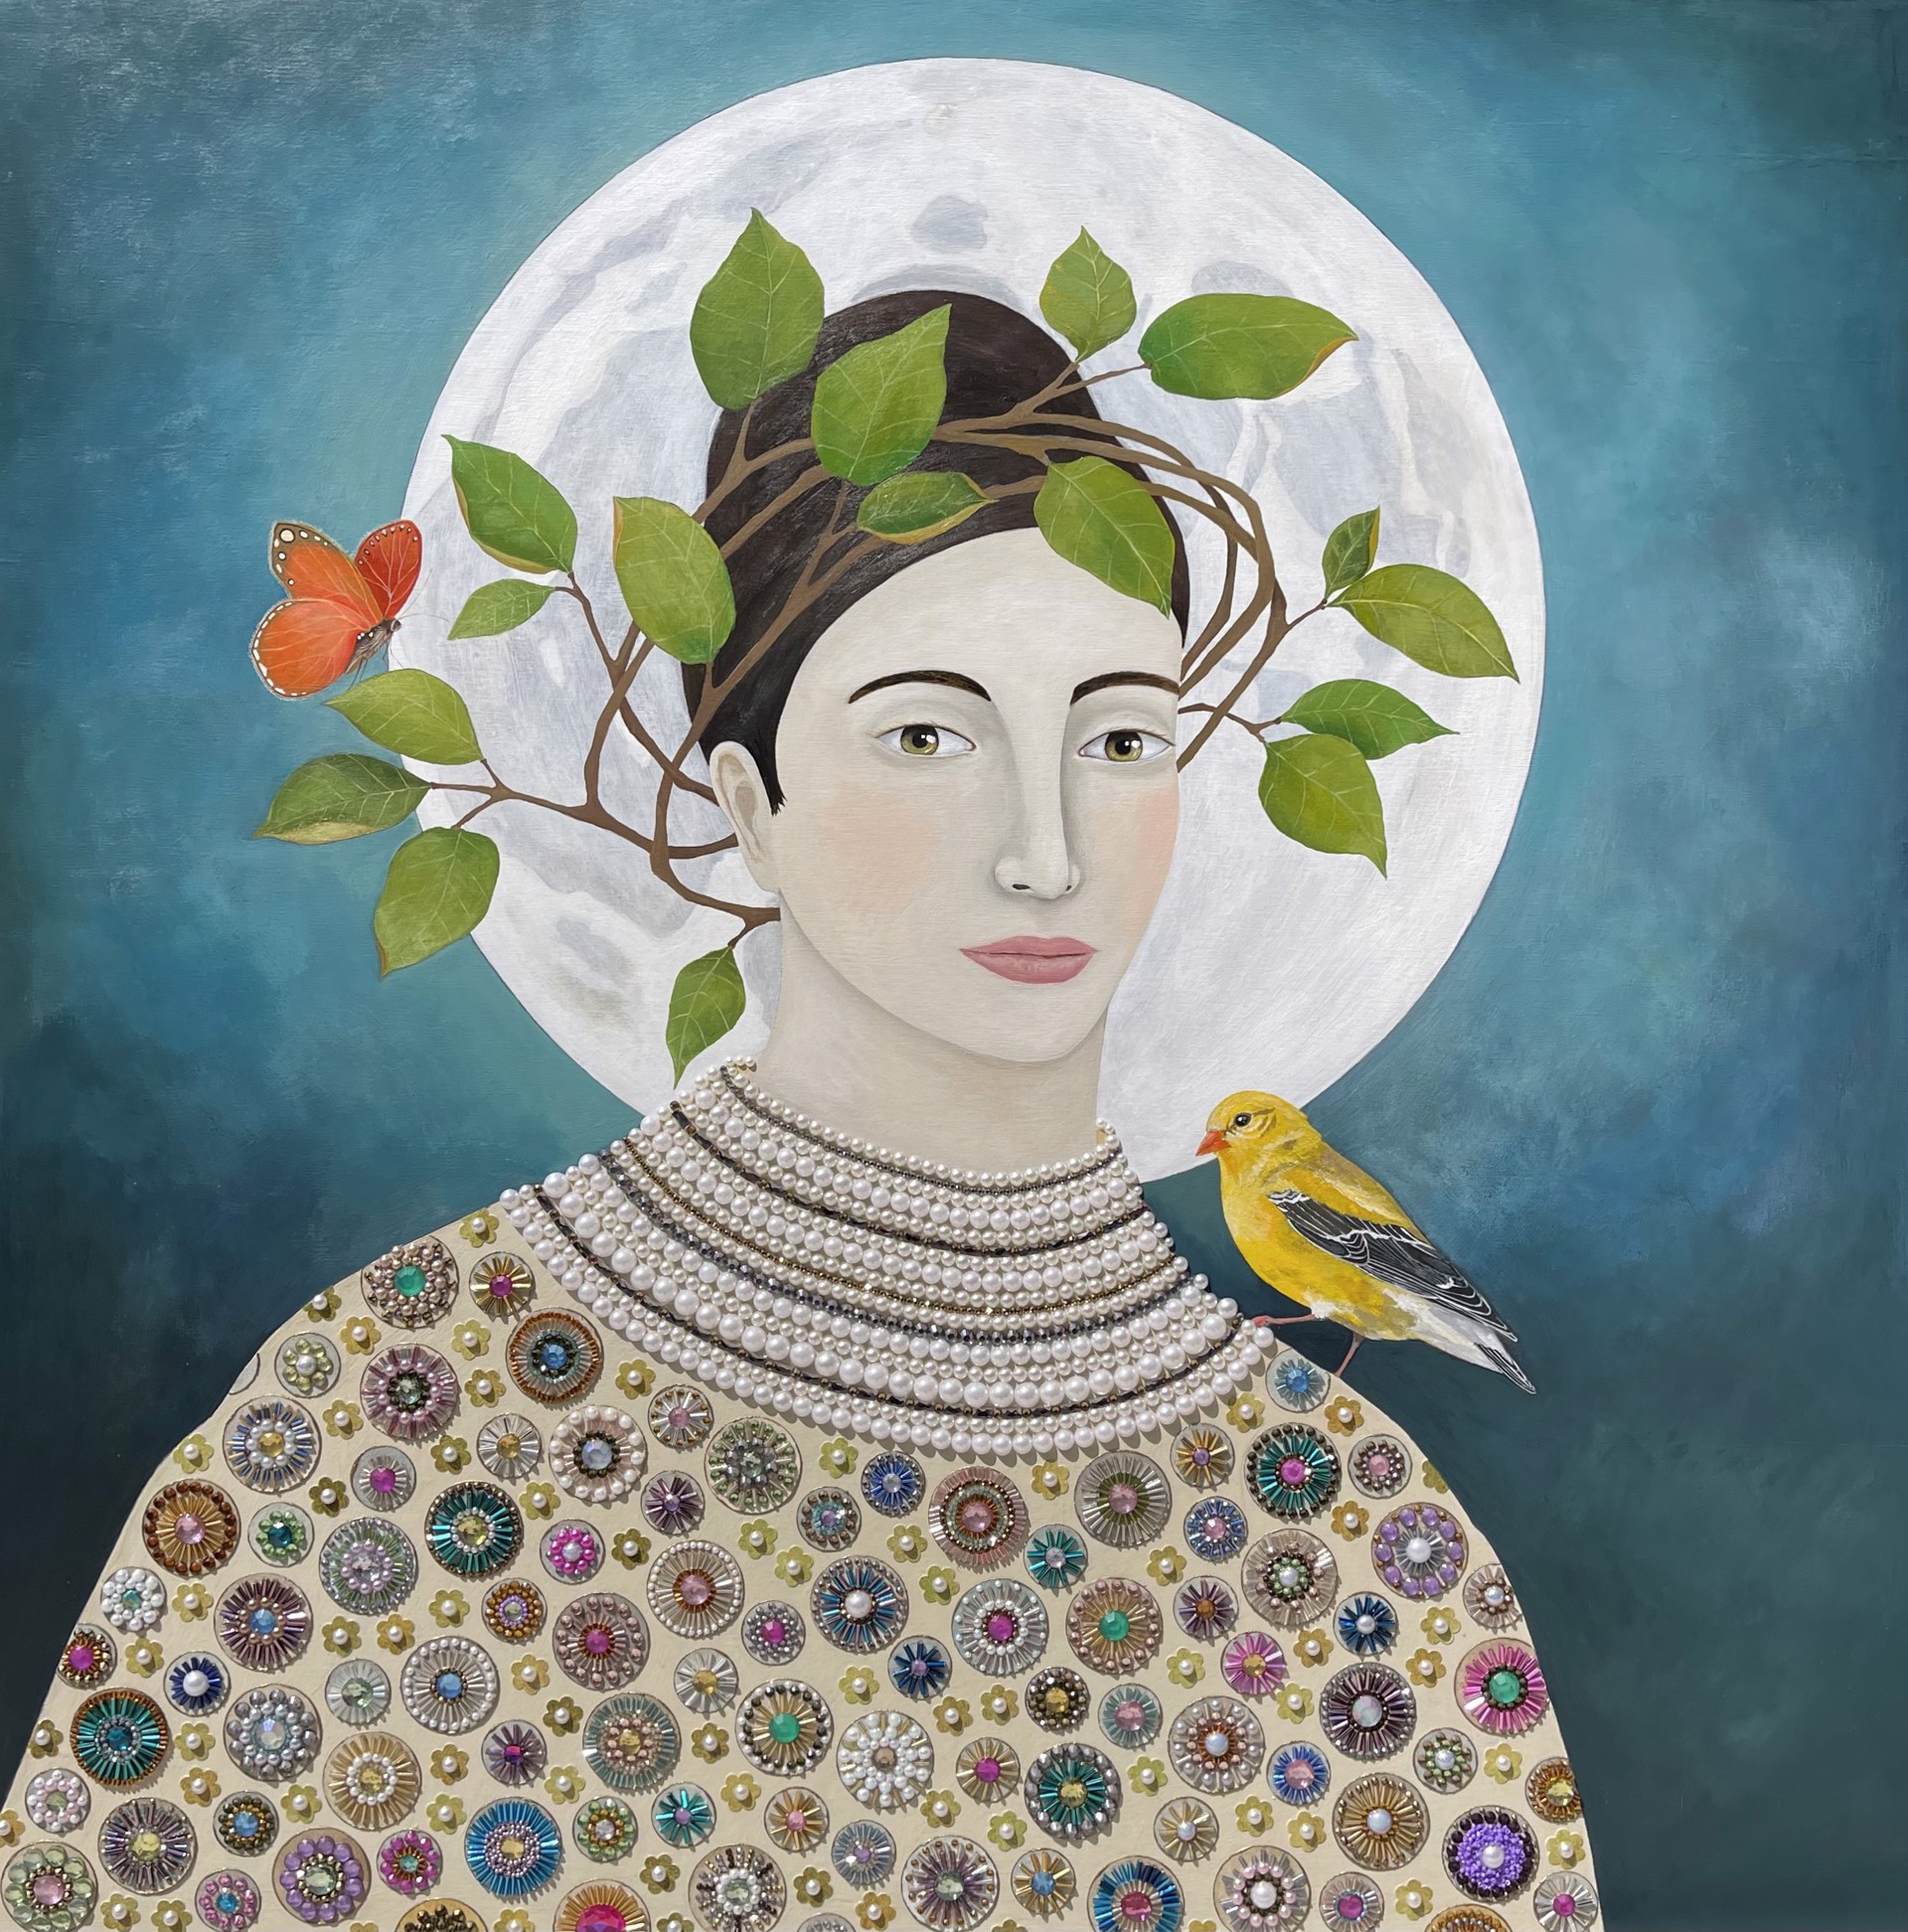 Full Moon and Goldfinch by Leslie Barron